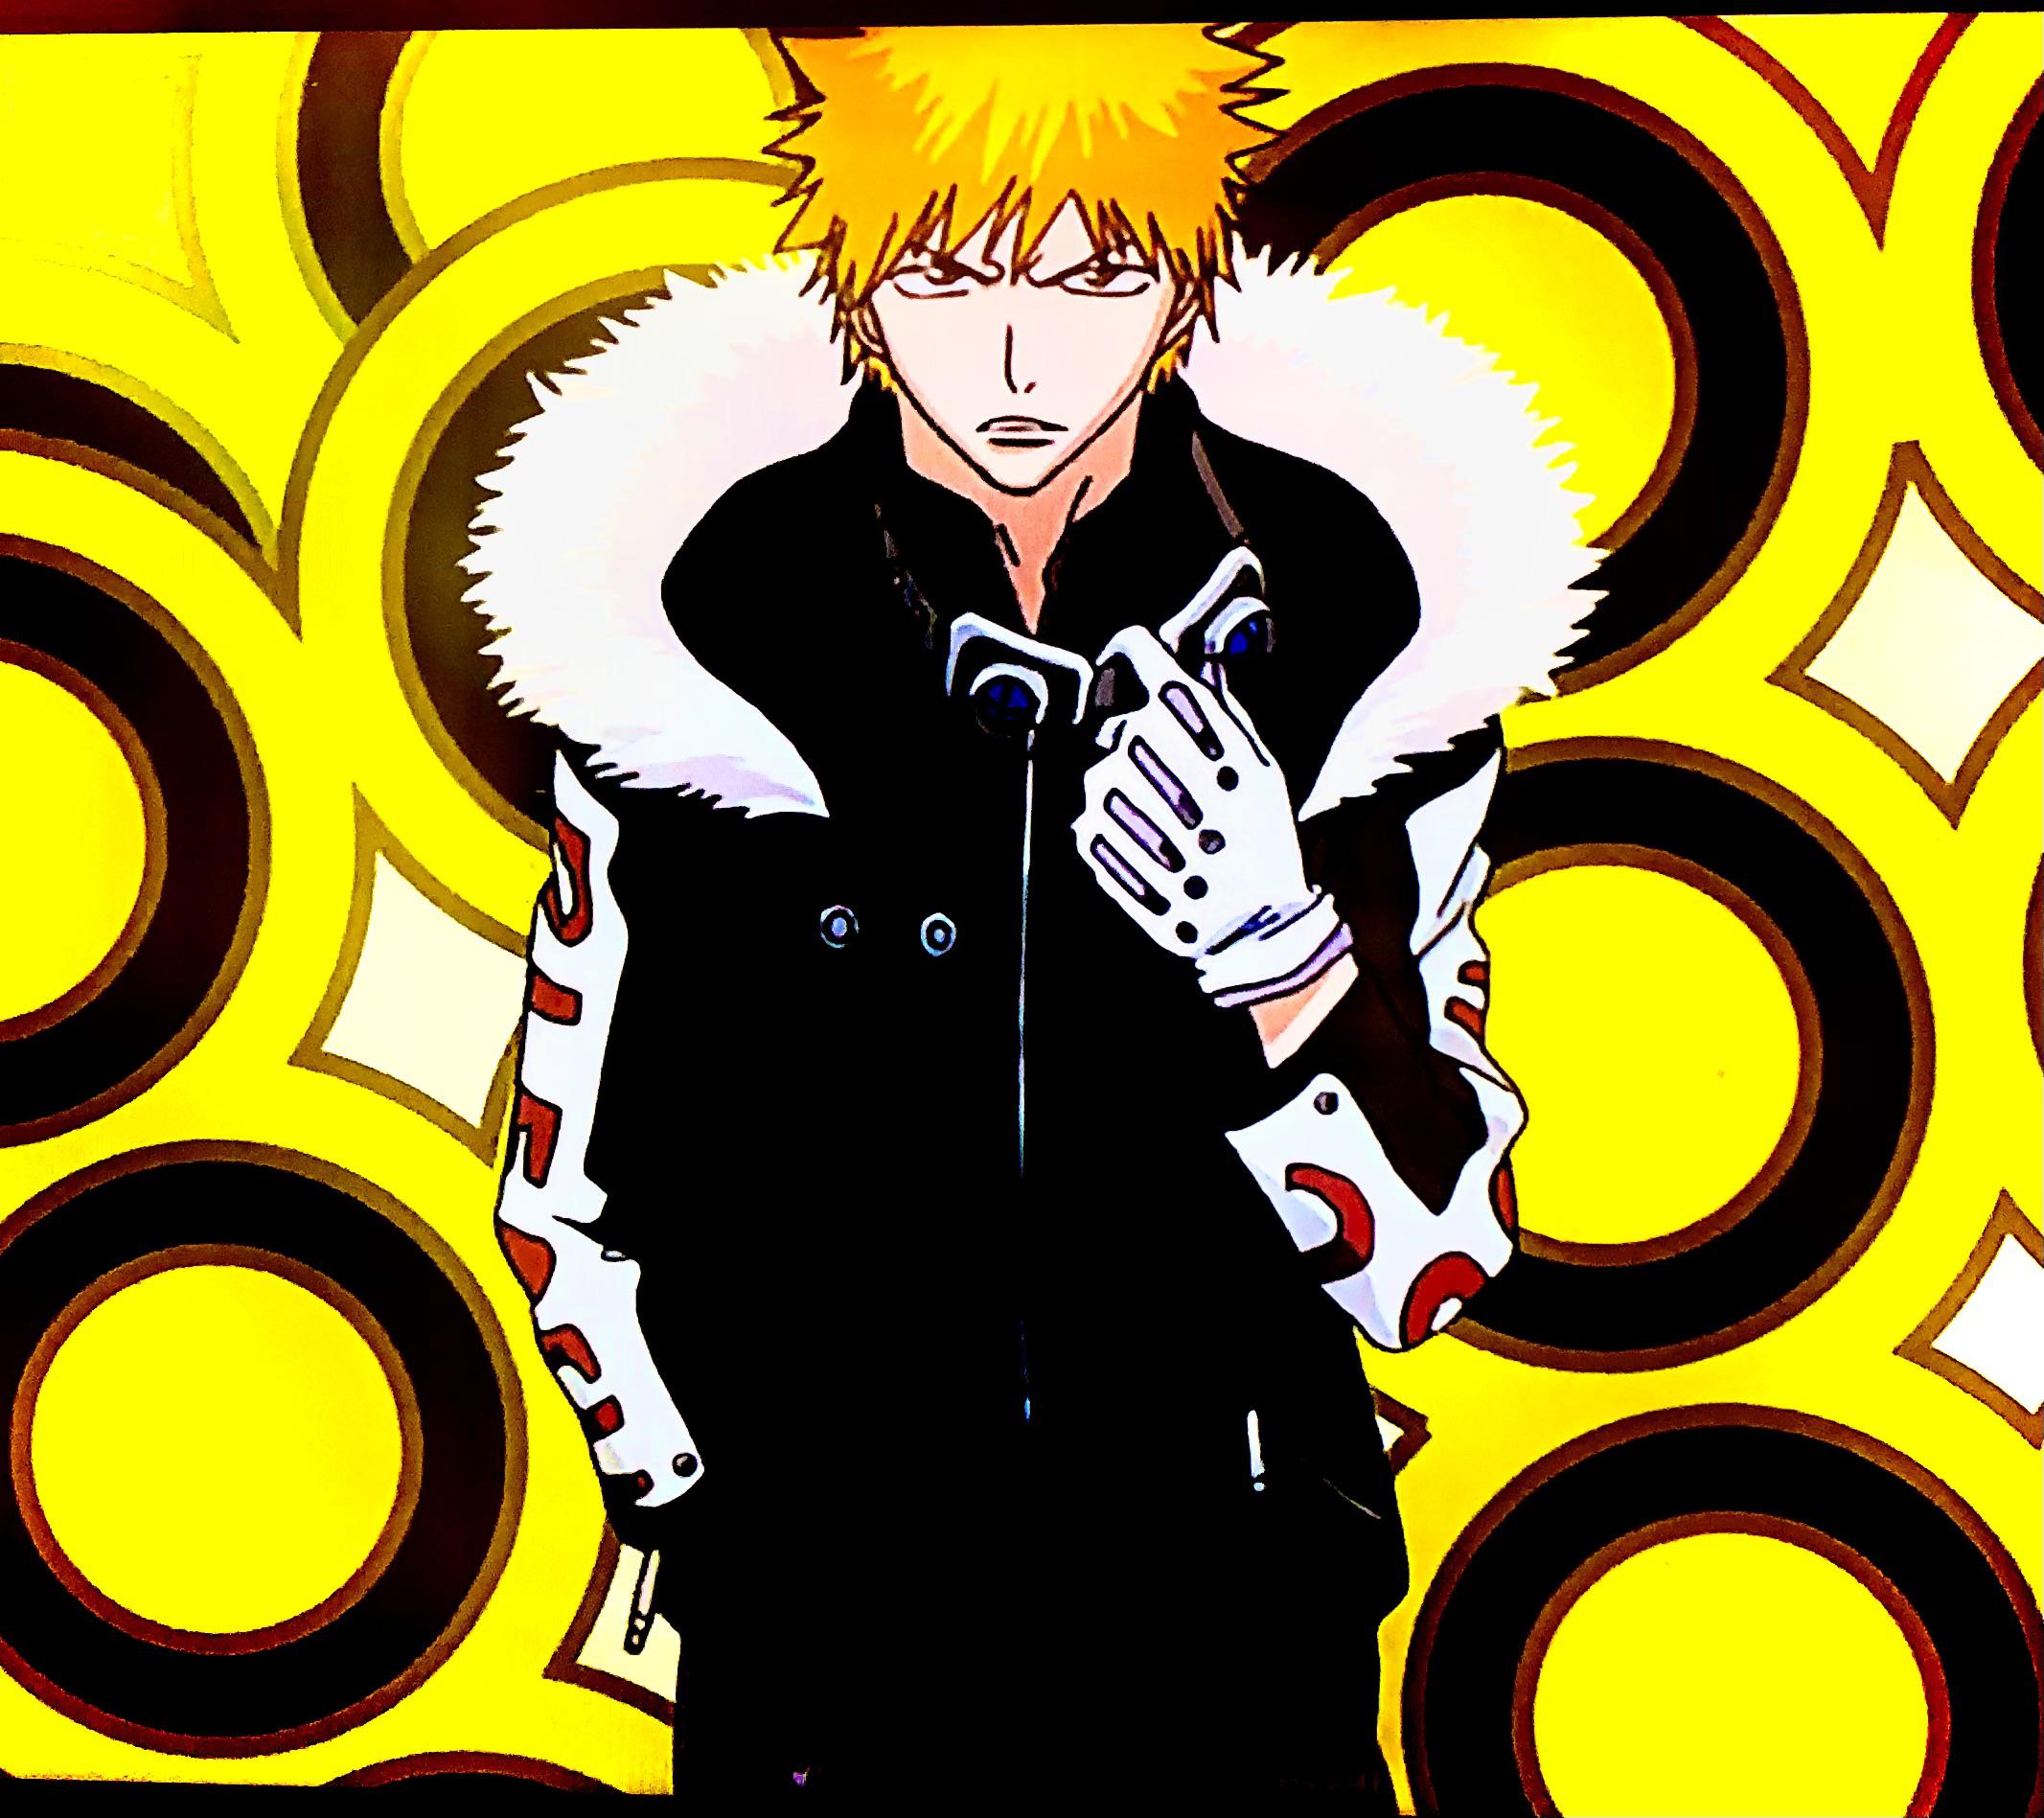 Edited drip Ichigo from the first opening how is it?